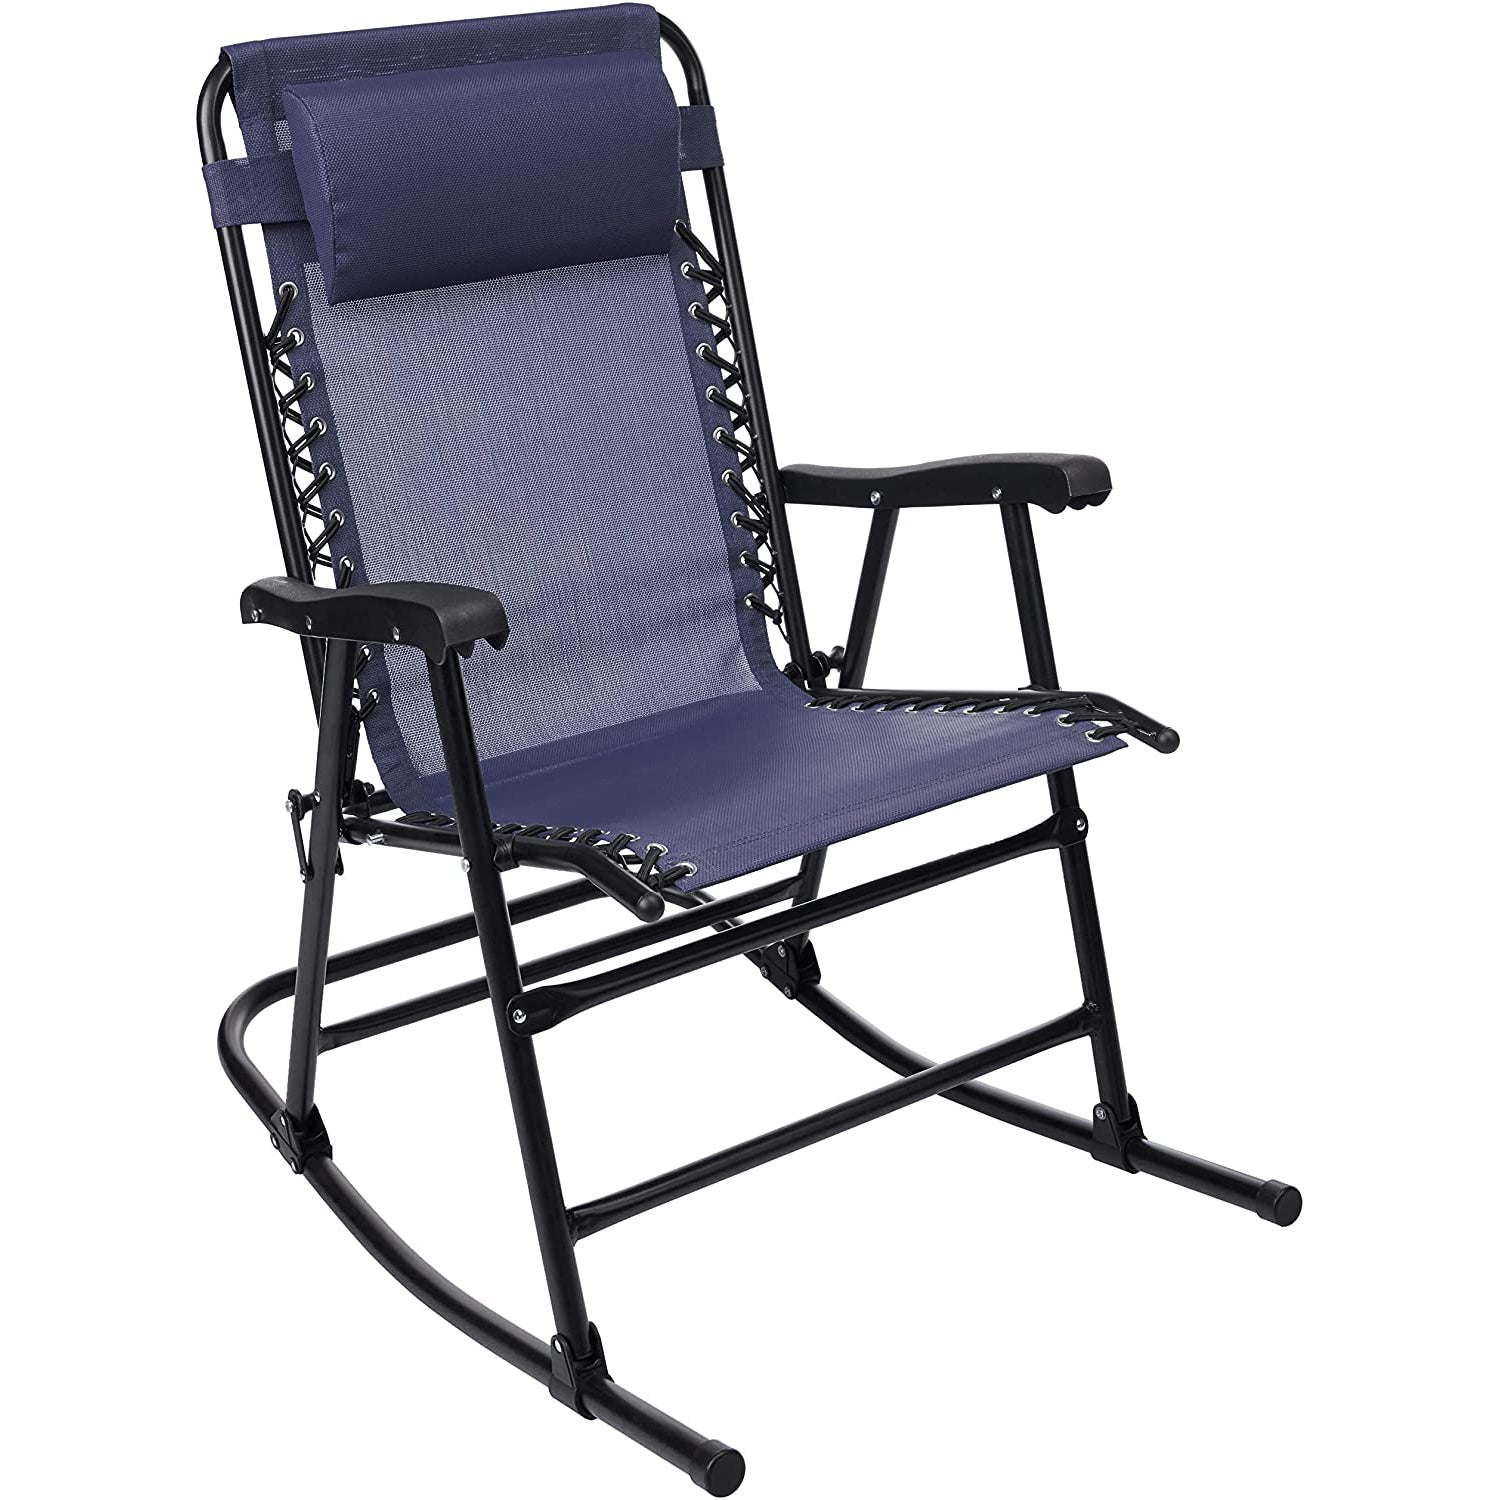 Black Metal Outdoor Rocking Chair with Headrest